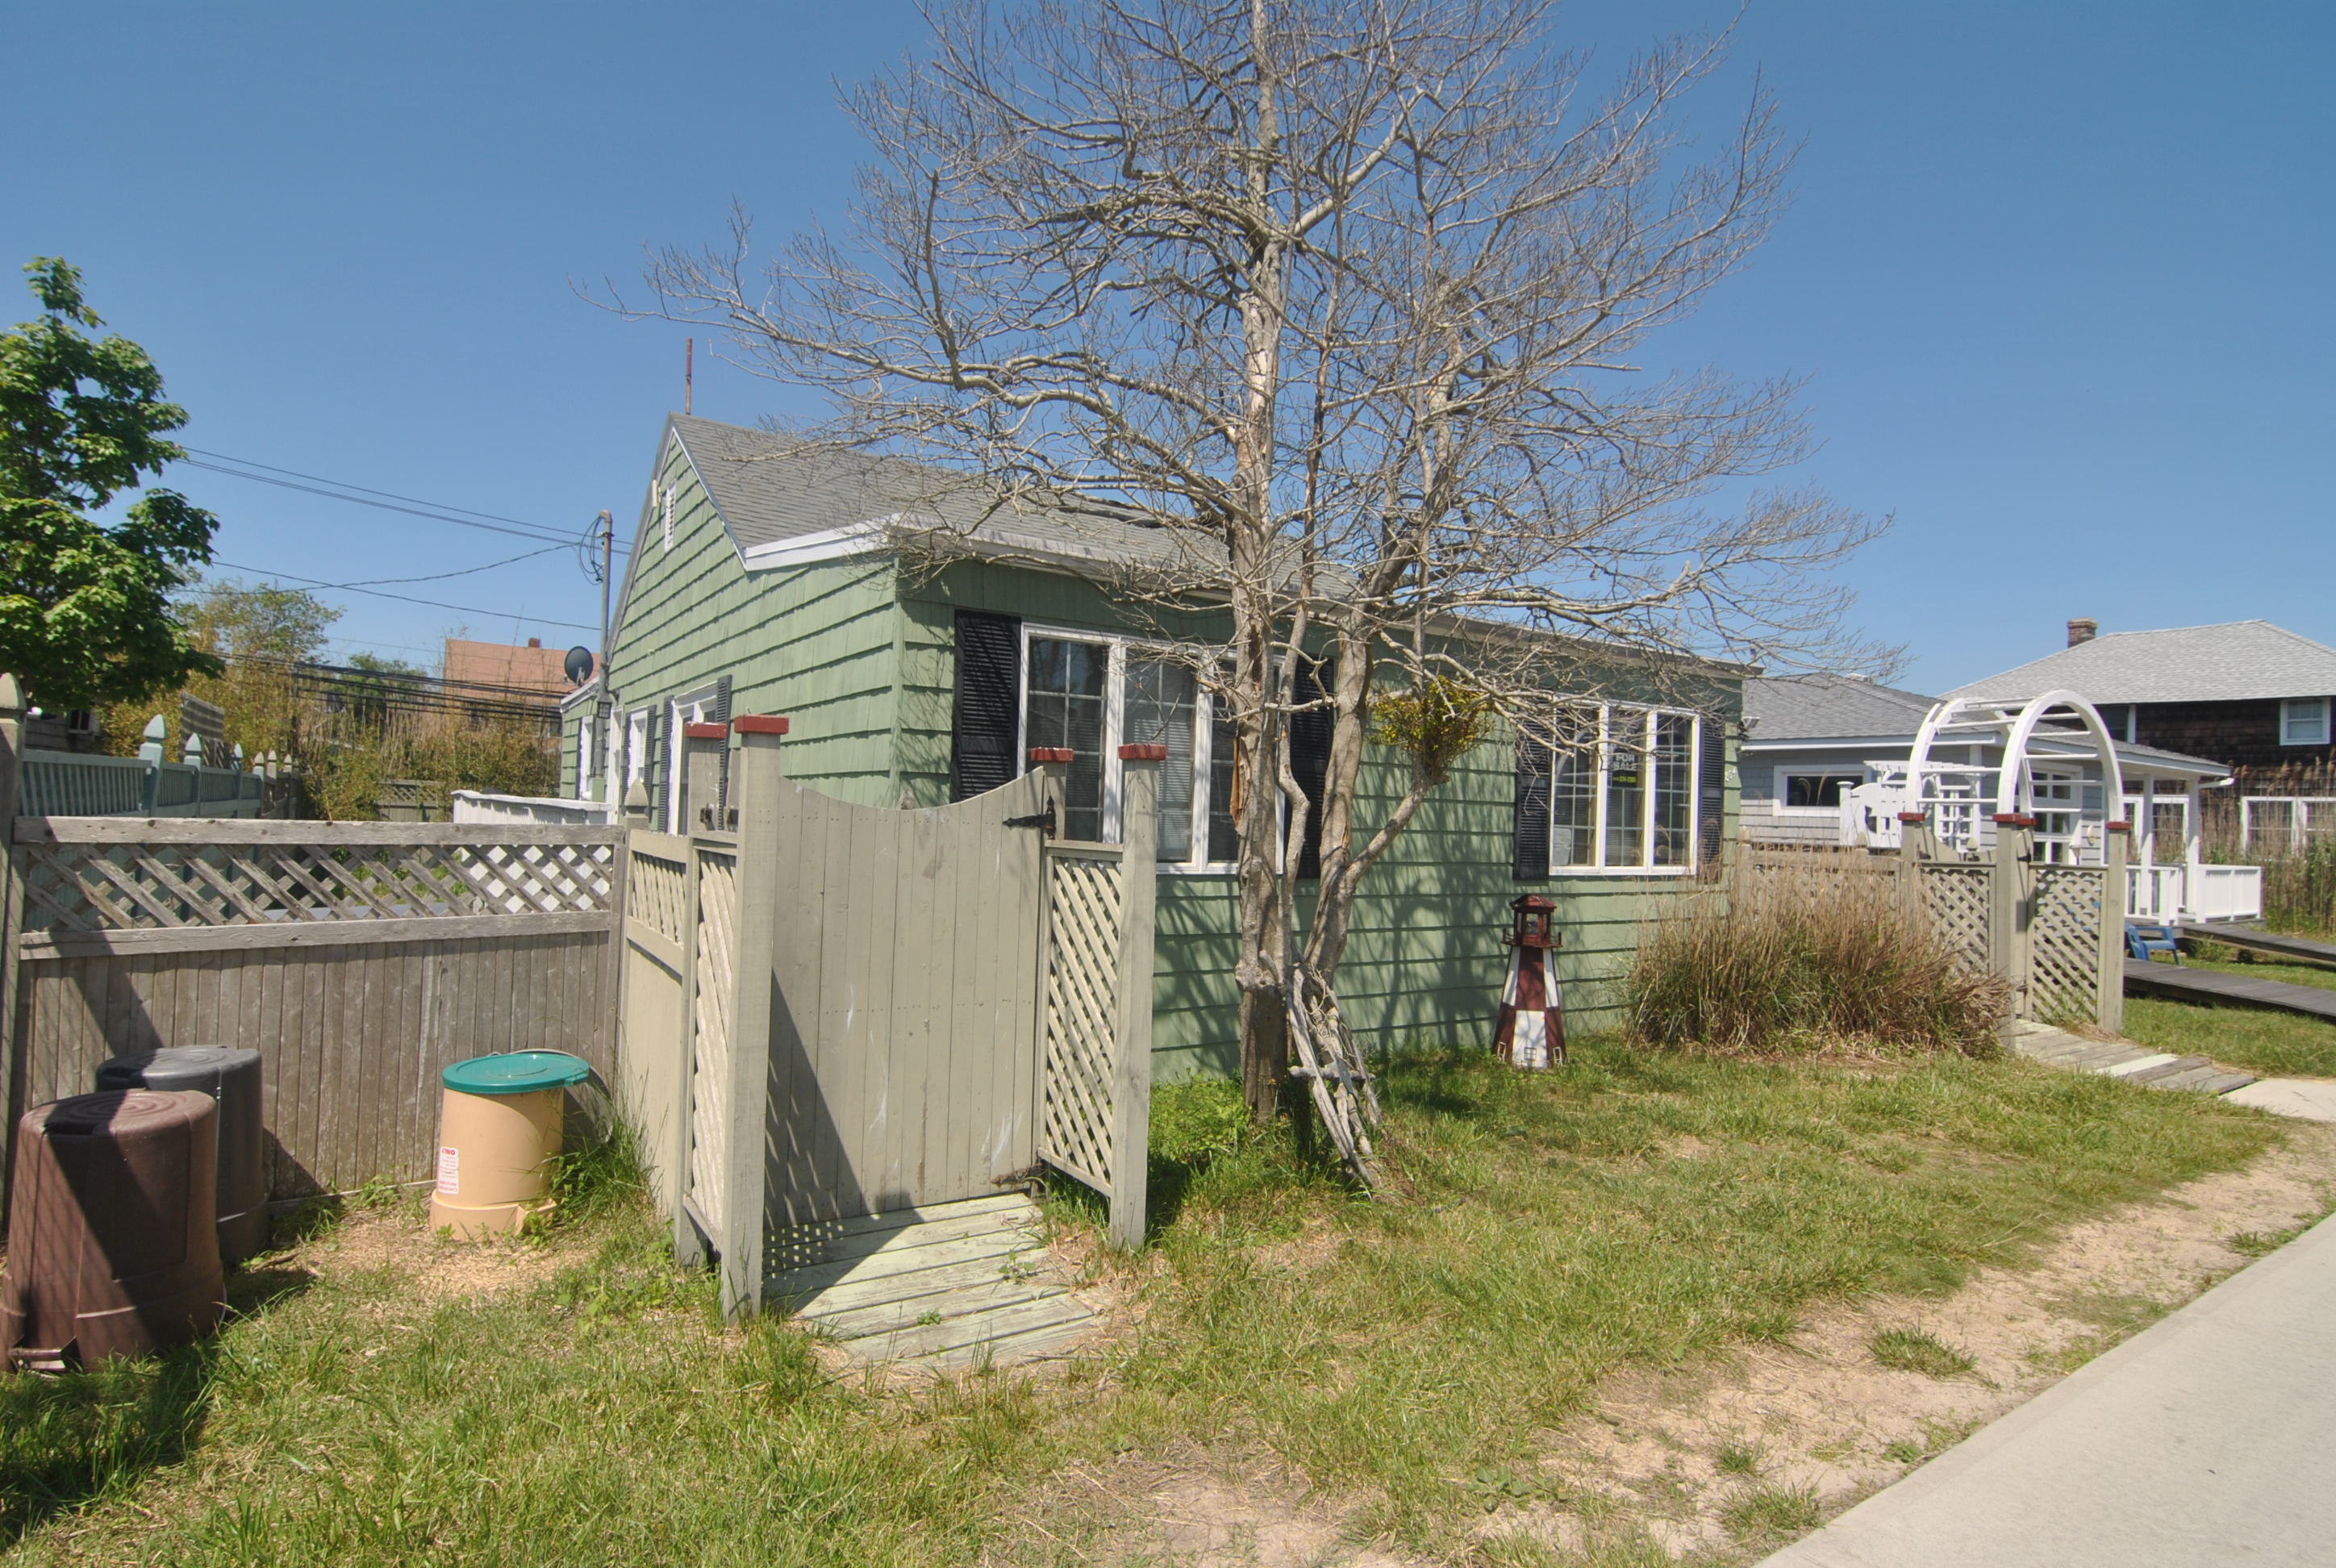 Everything you need in a beach house! This 4 bedroom house is ideal. This charming home is all updated 4 bedrooms and 1.5  baths. Open living and dining area. Sunny rear deck with outdoor shower. Quiet and convenient Ocean Beach location. Central air conditioning. 
<BR>
